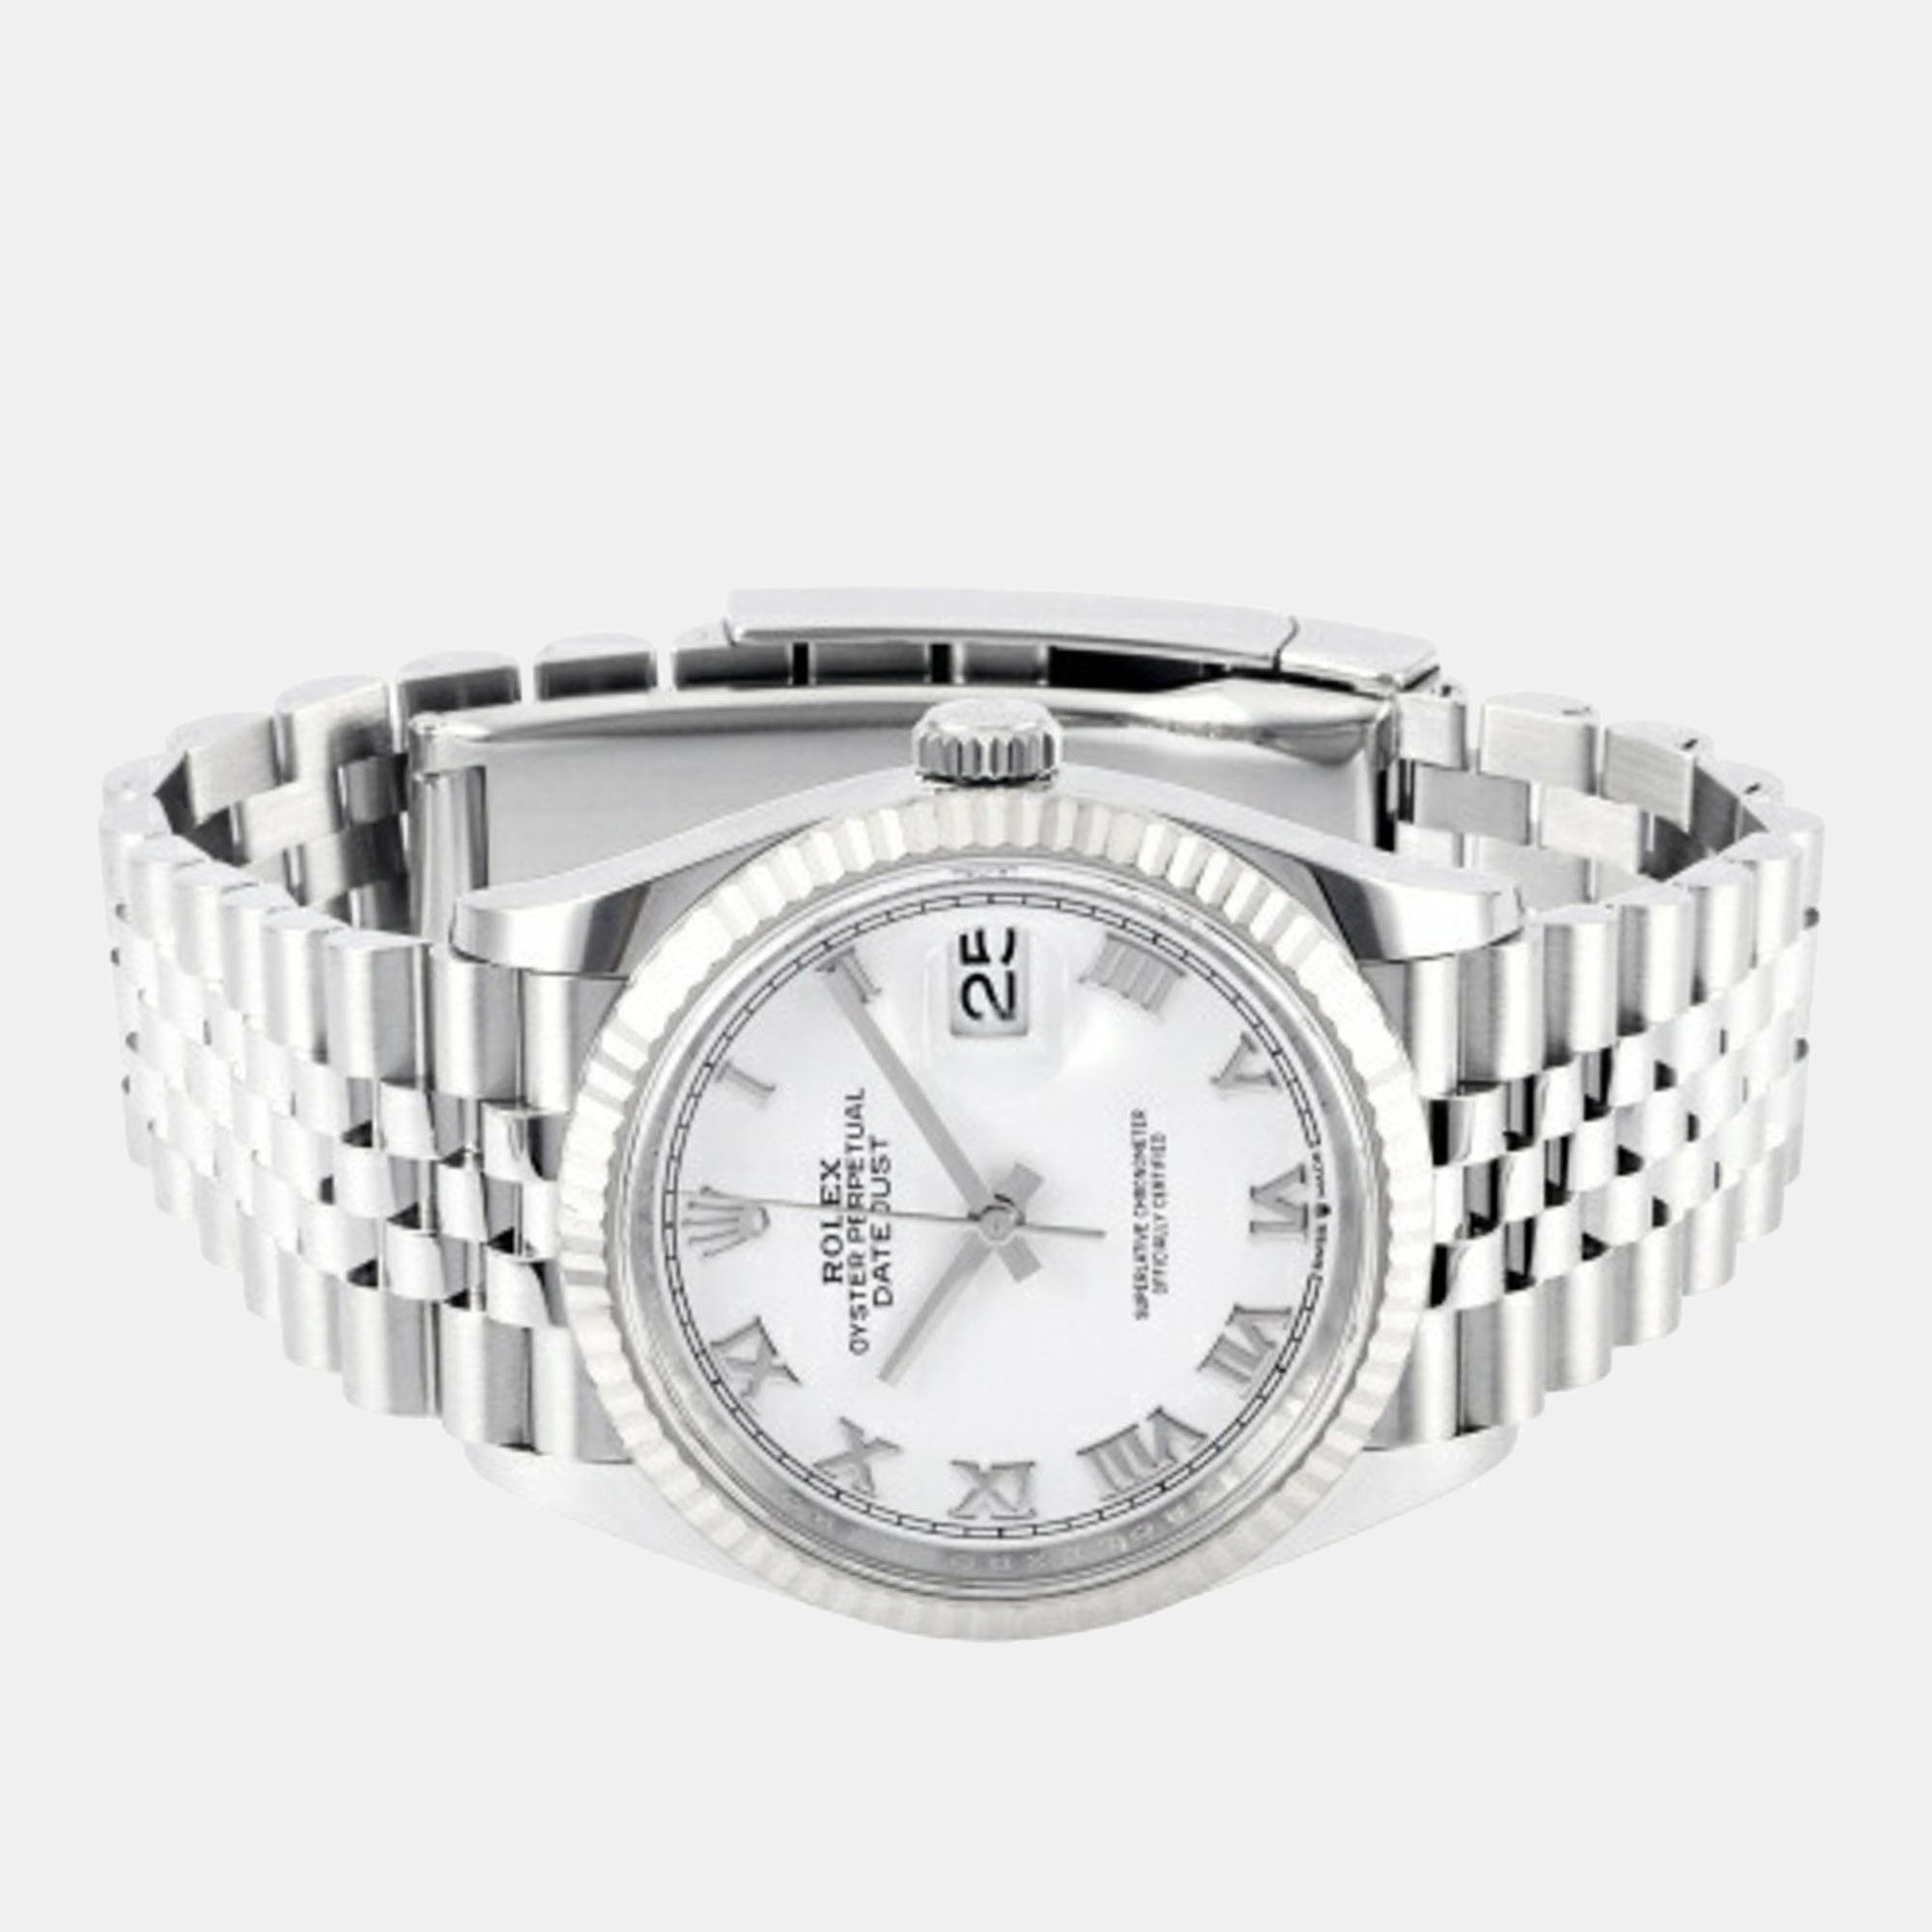 

Rolex White 18k White Gold And Stainless Steel Datejust 126234 Automatic Men's Wristwatch 36 mm